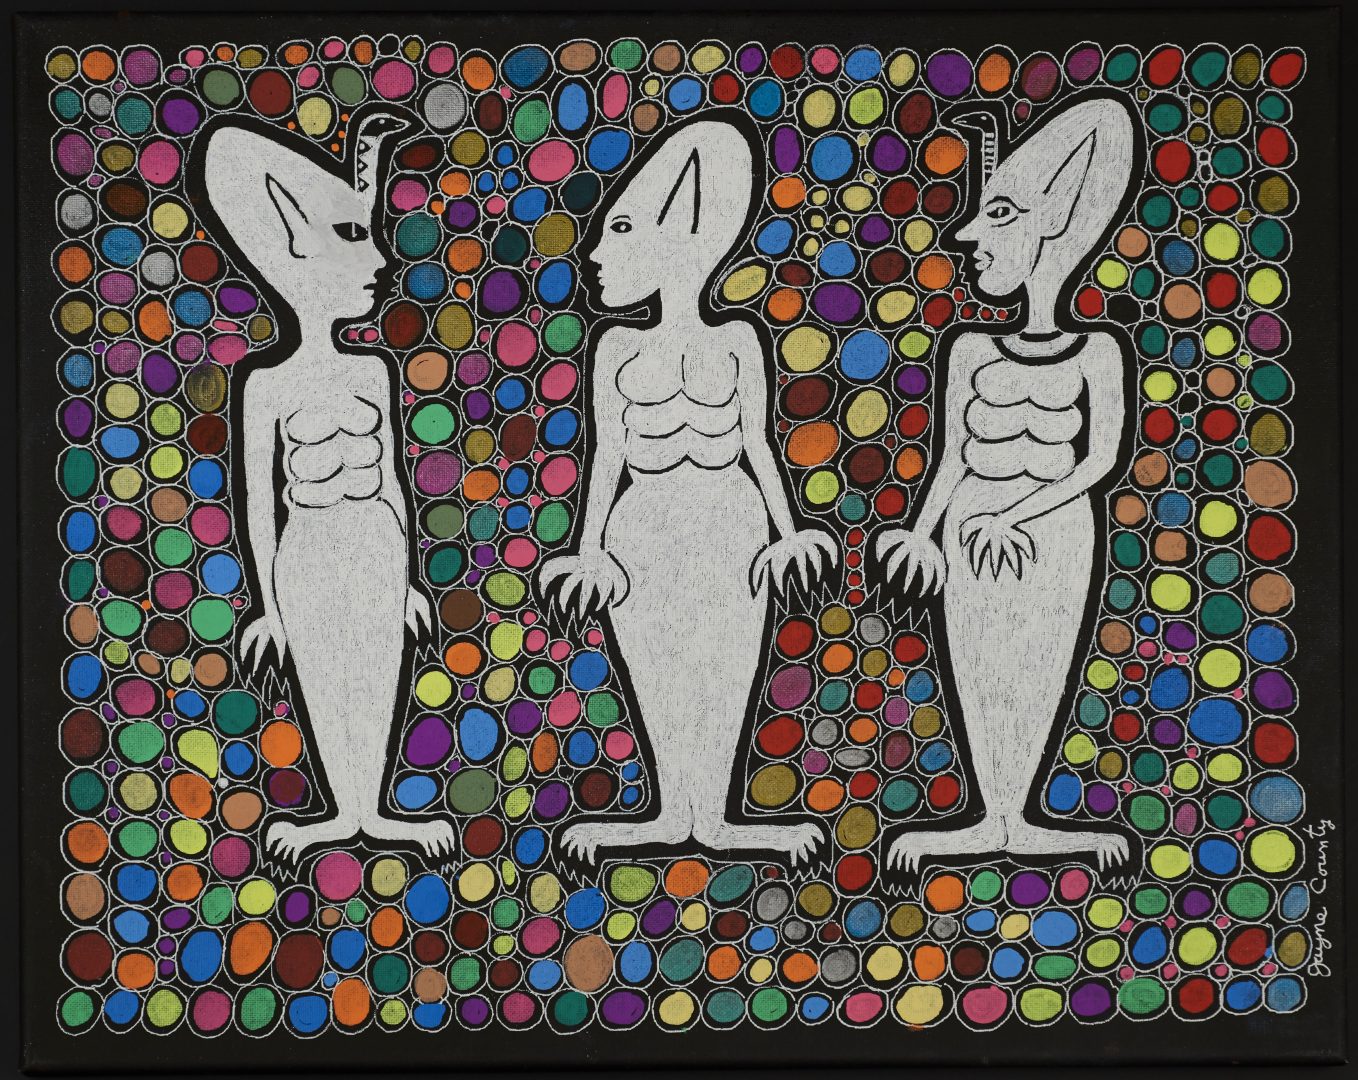 Painting by Jayne County depicting 3 figures each with 3 pairs of breasts